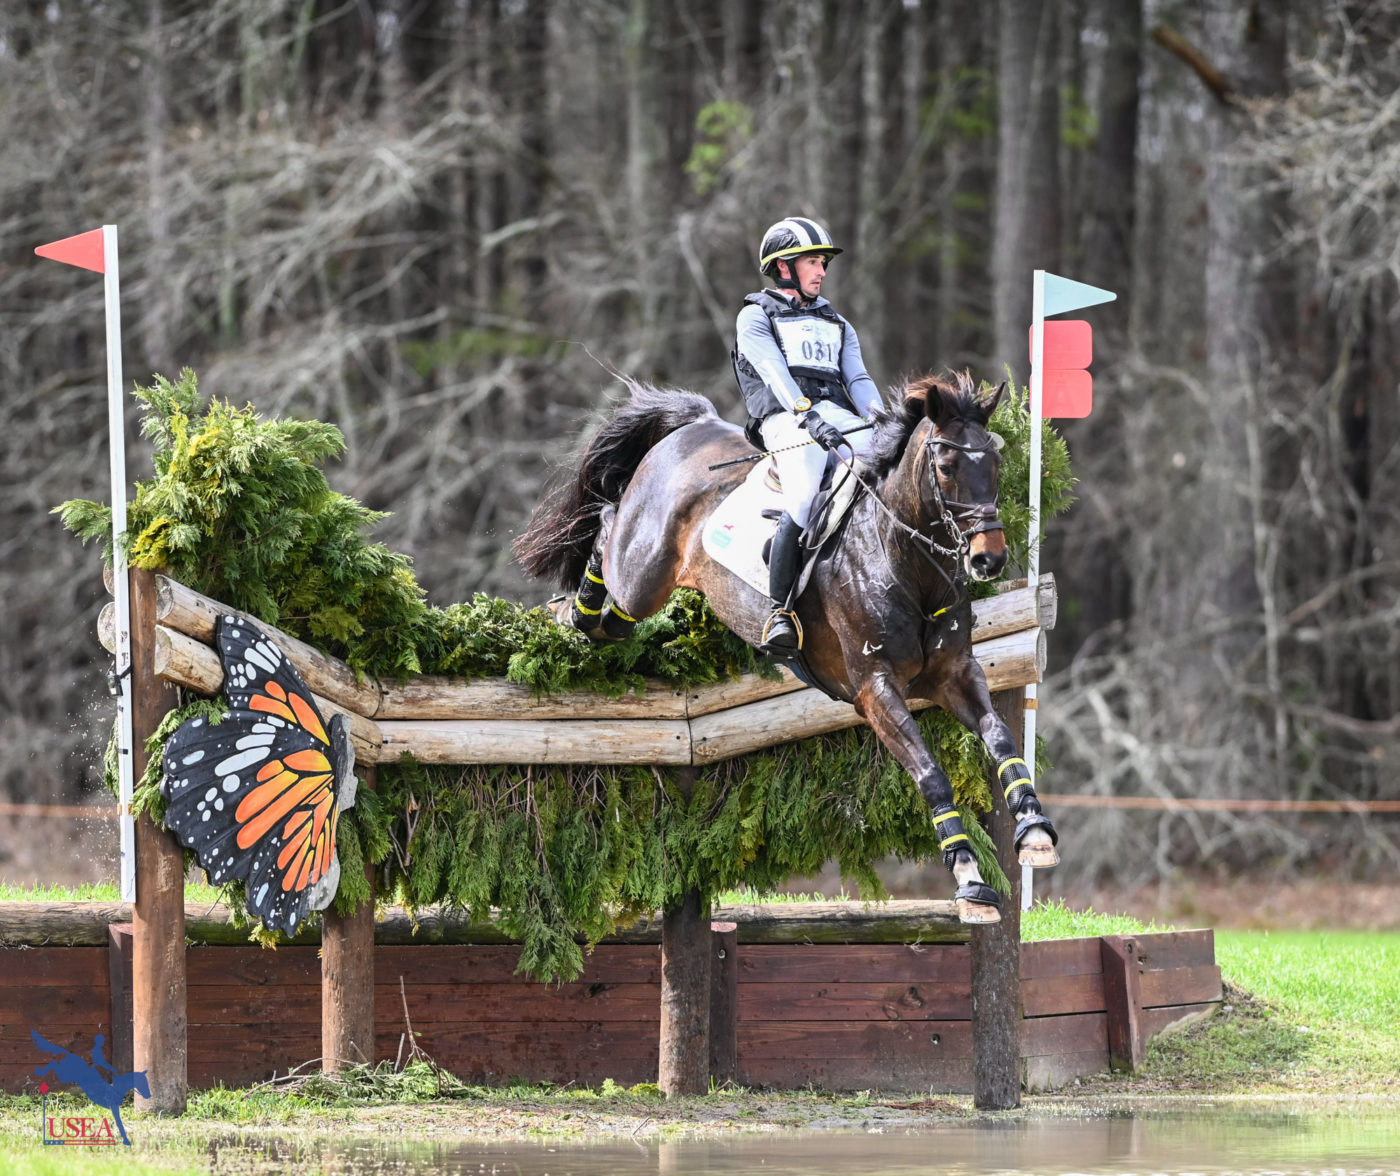 Woods Baughman and C'est La Vie 135 were caught in action in the CCI3*-S division. USEA/Lindsay Berreth photo